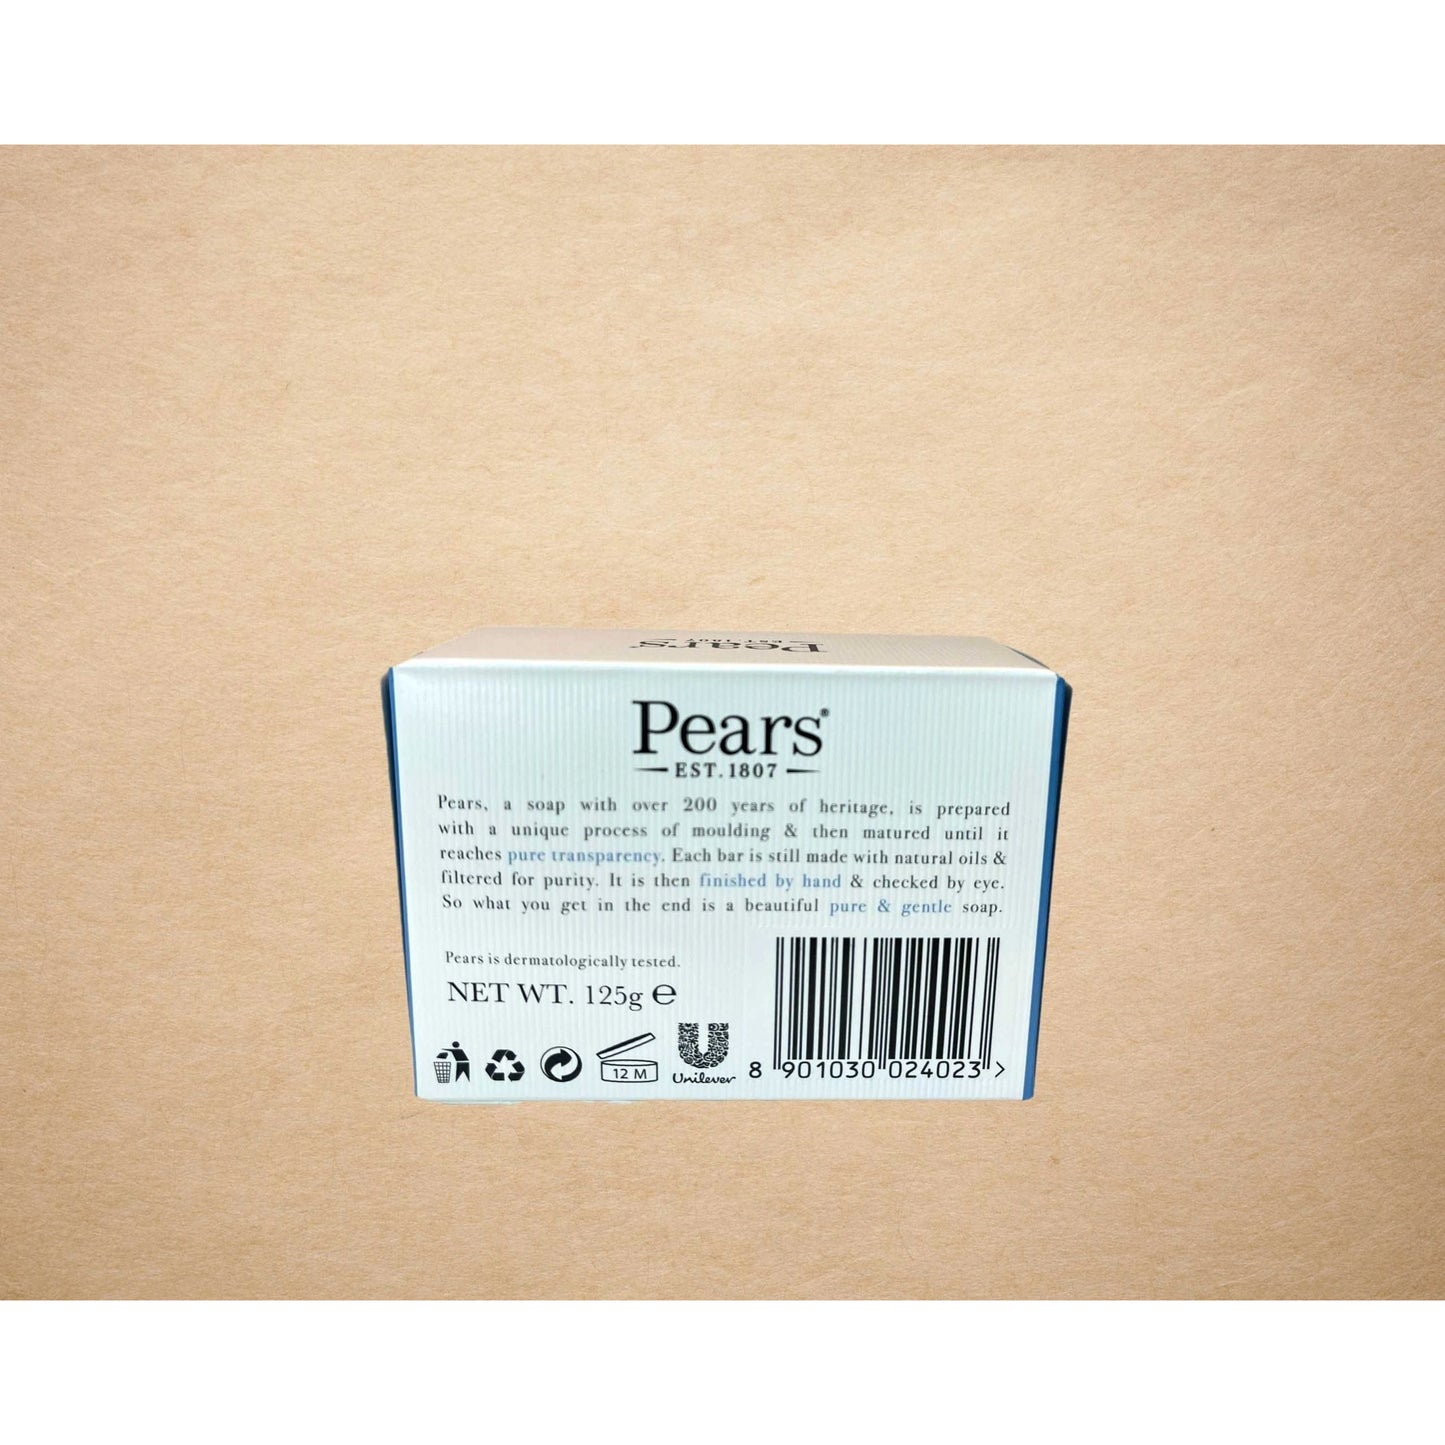 Pears Transparent Soap, Mint Extract